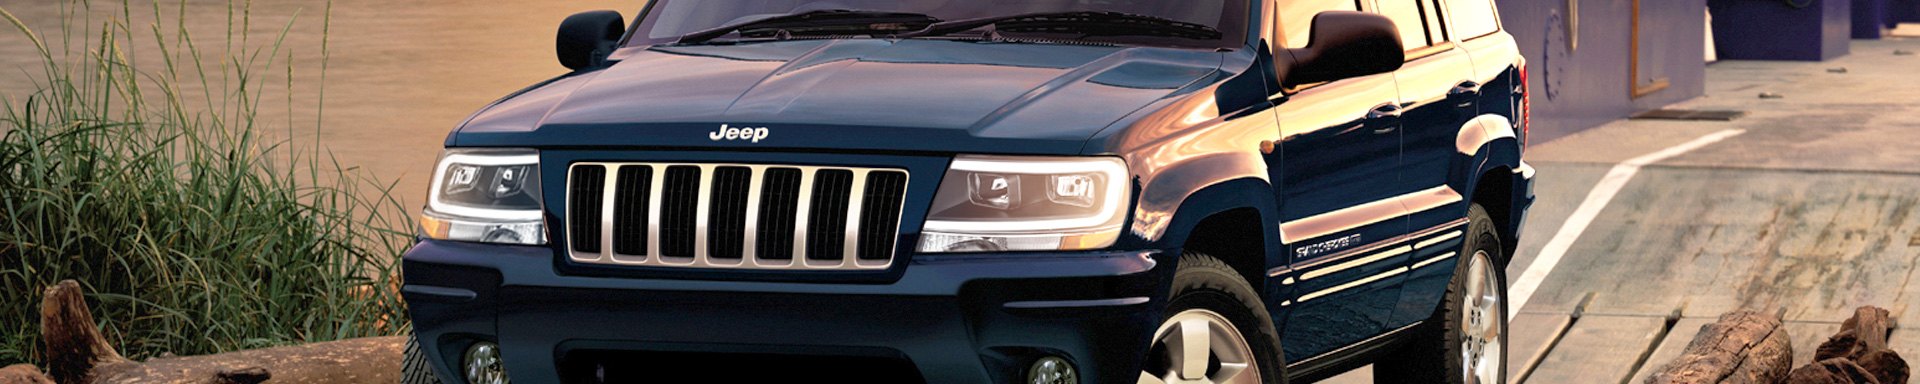 Upgrade Headlights and Tail Lights of Your Grand Cherokee with New Anzo Products